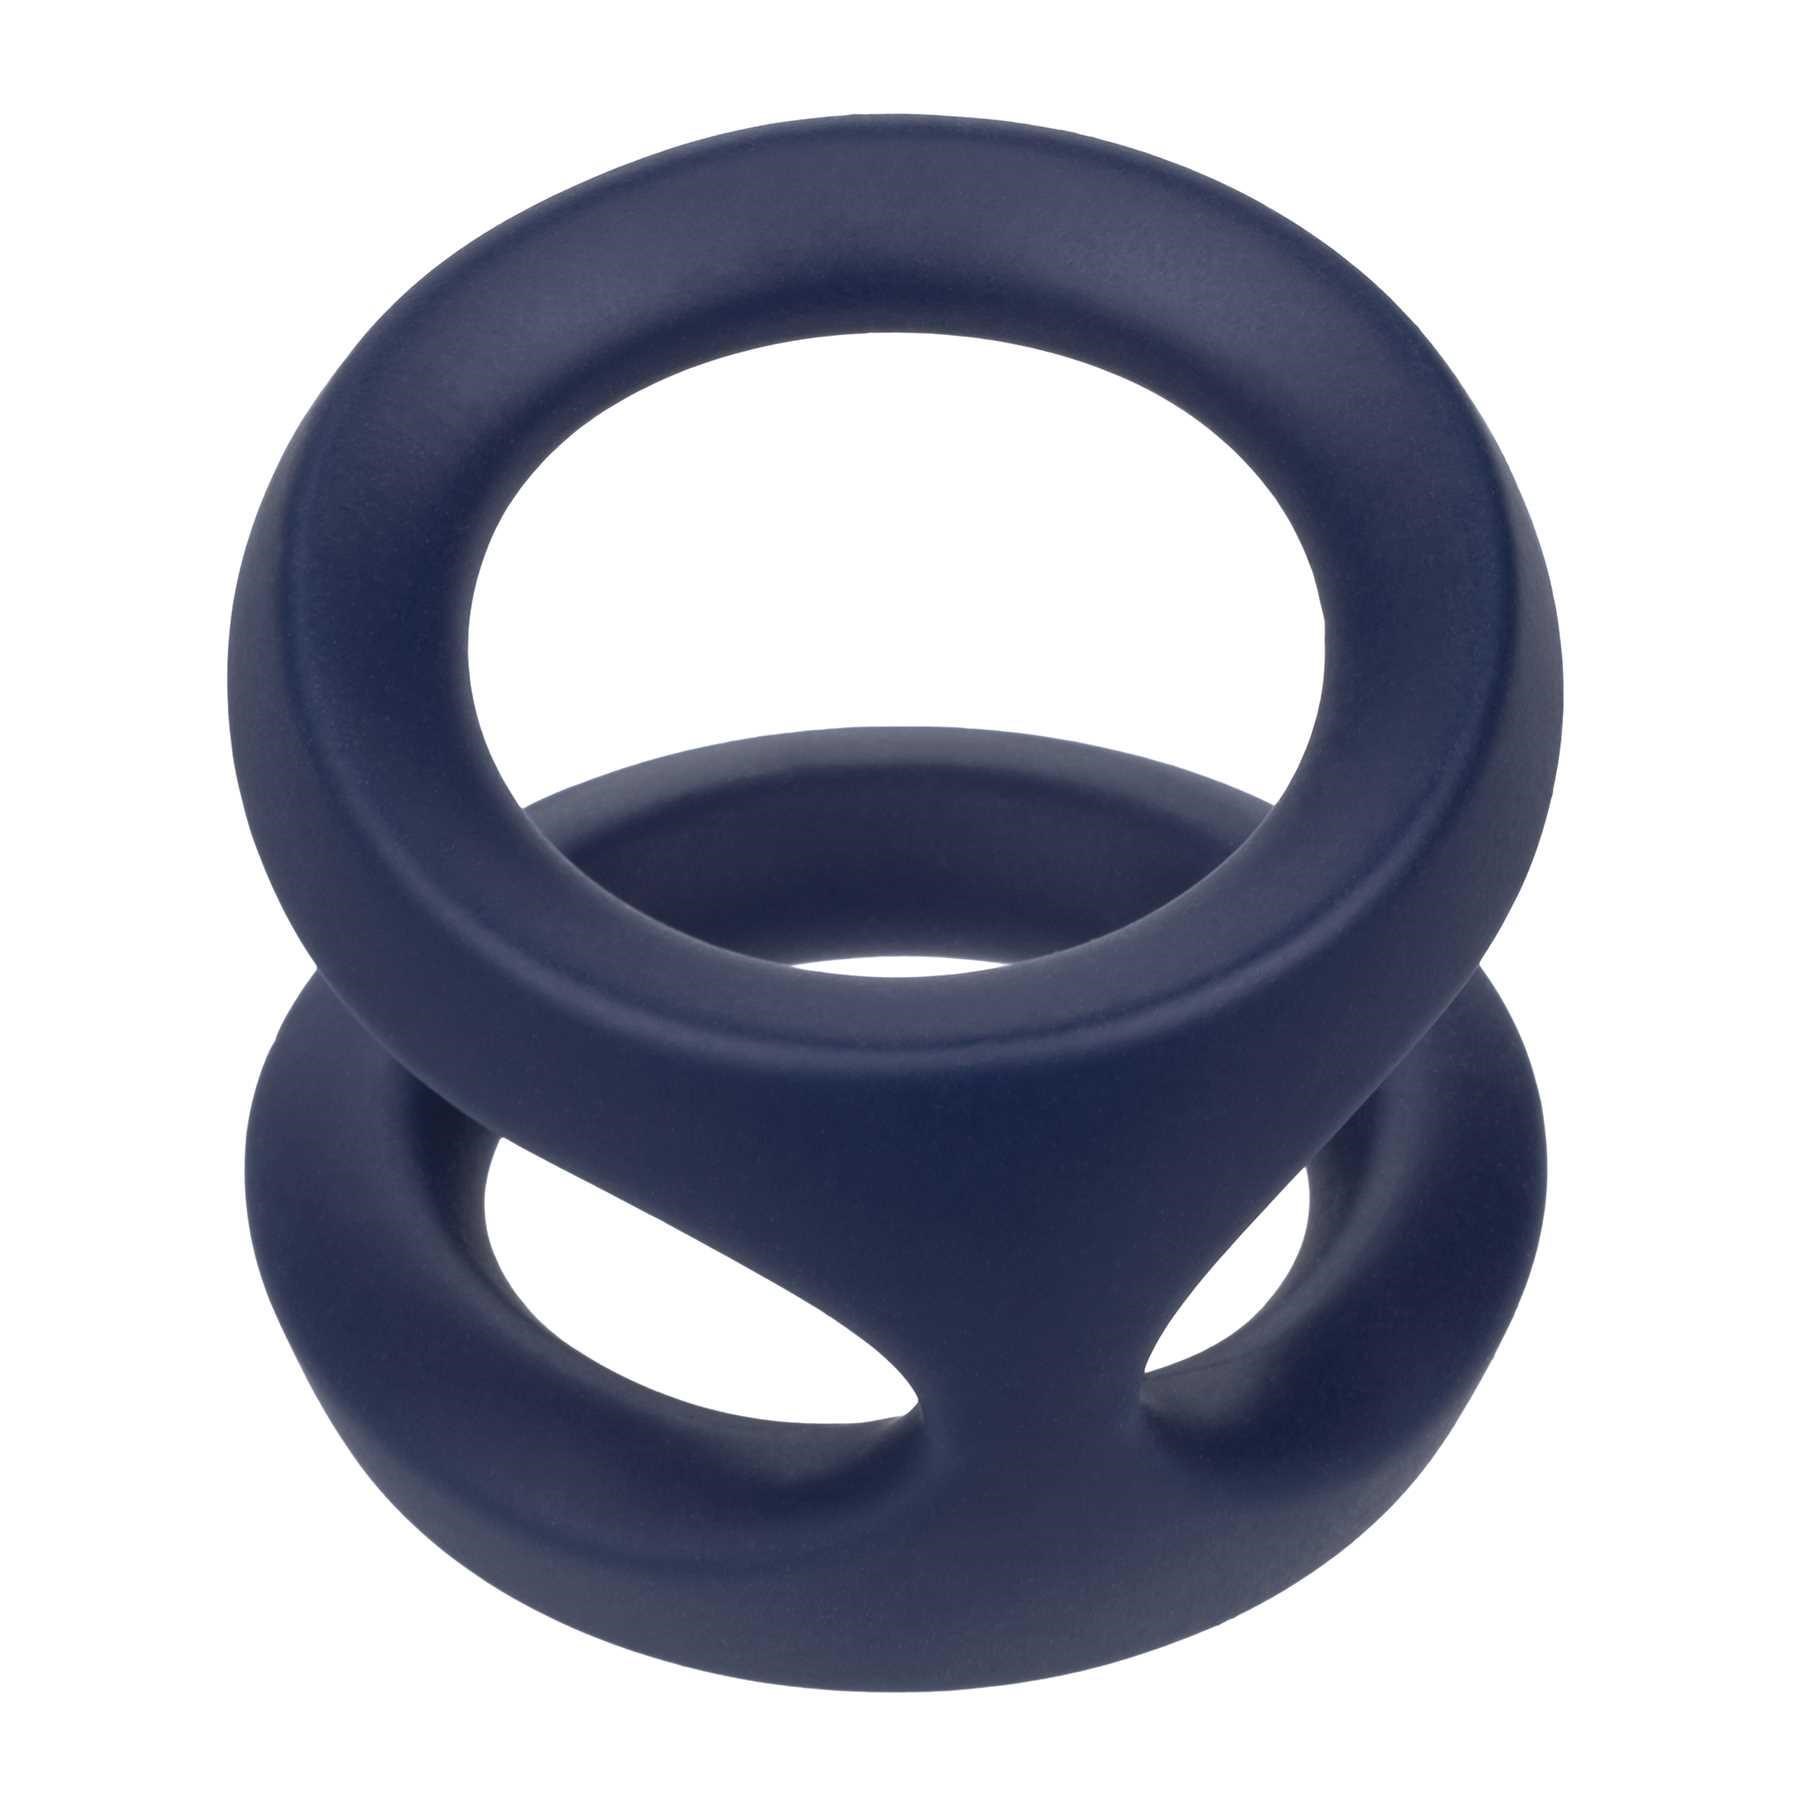 Viceroy Dual Ring product image 8